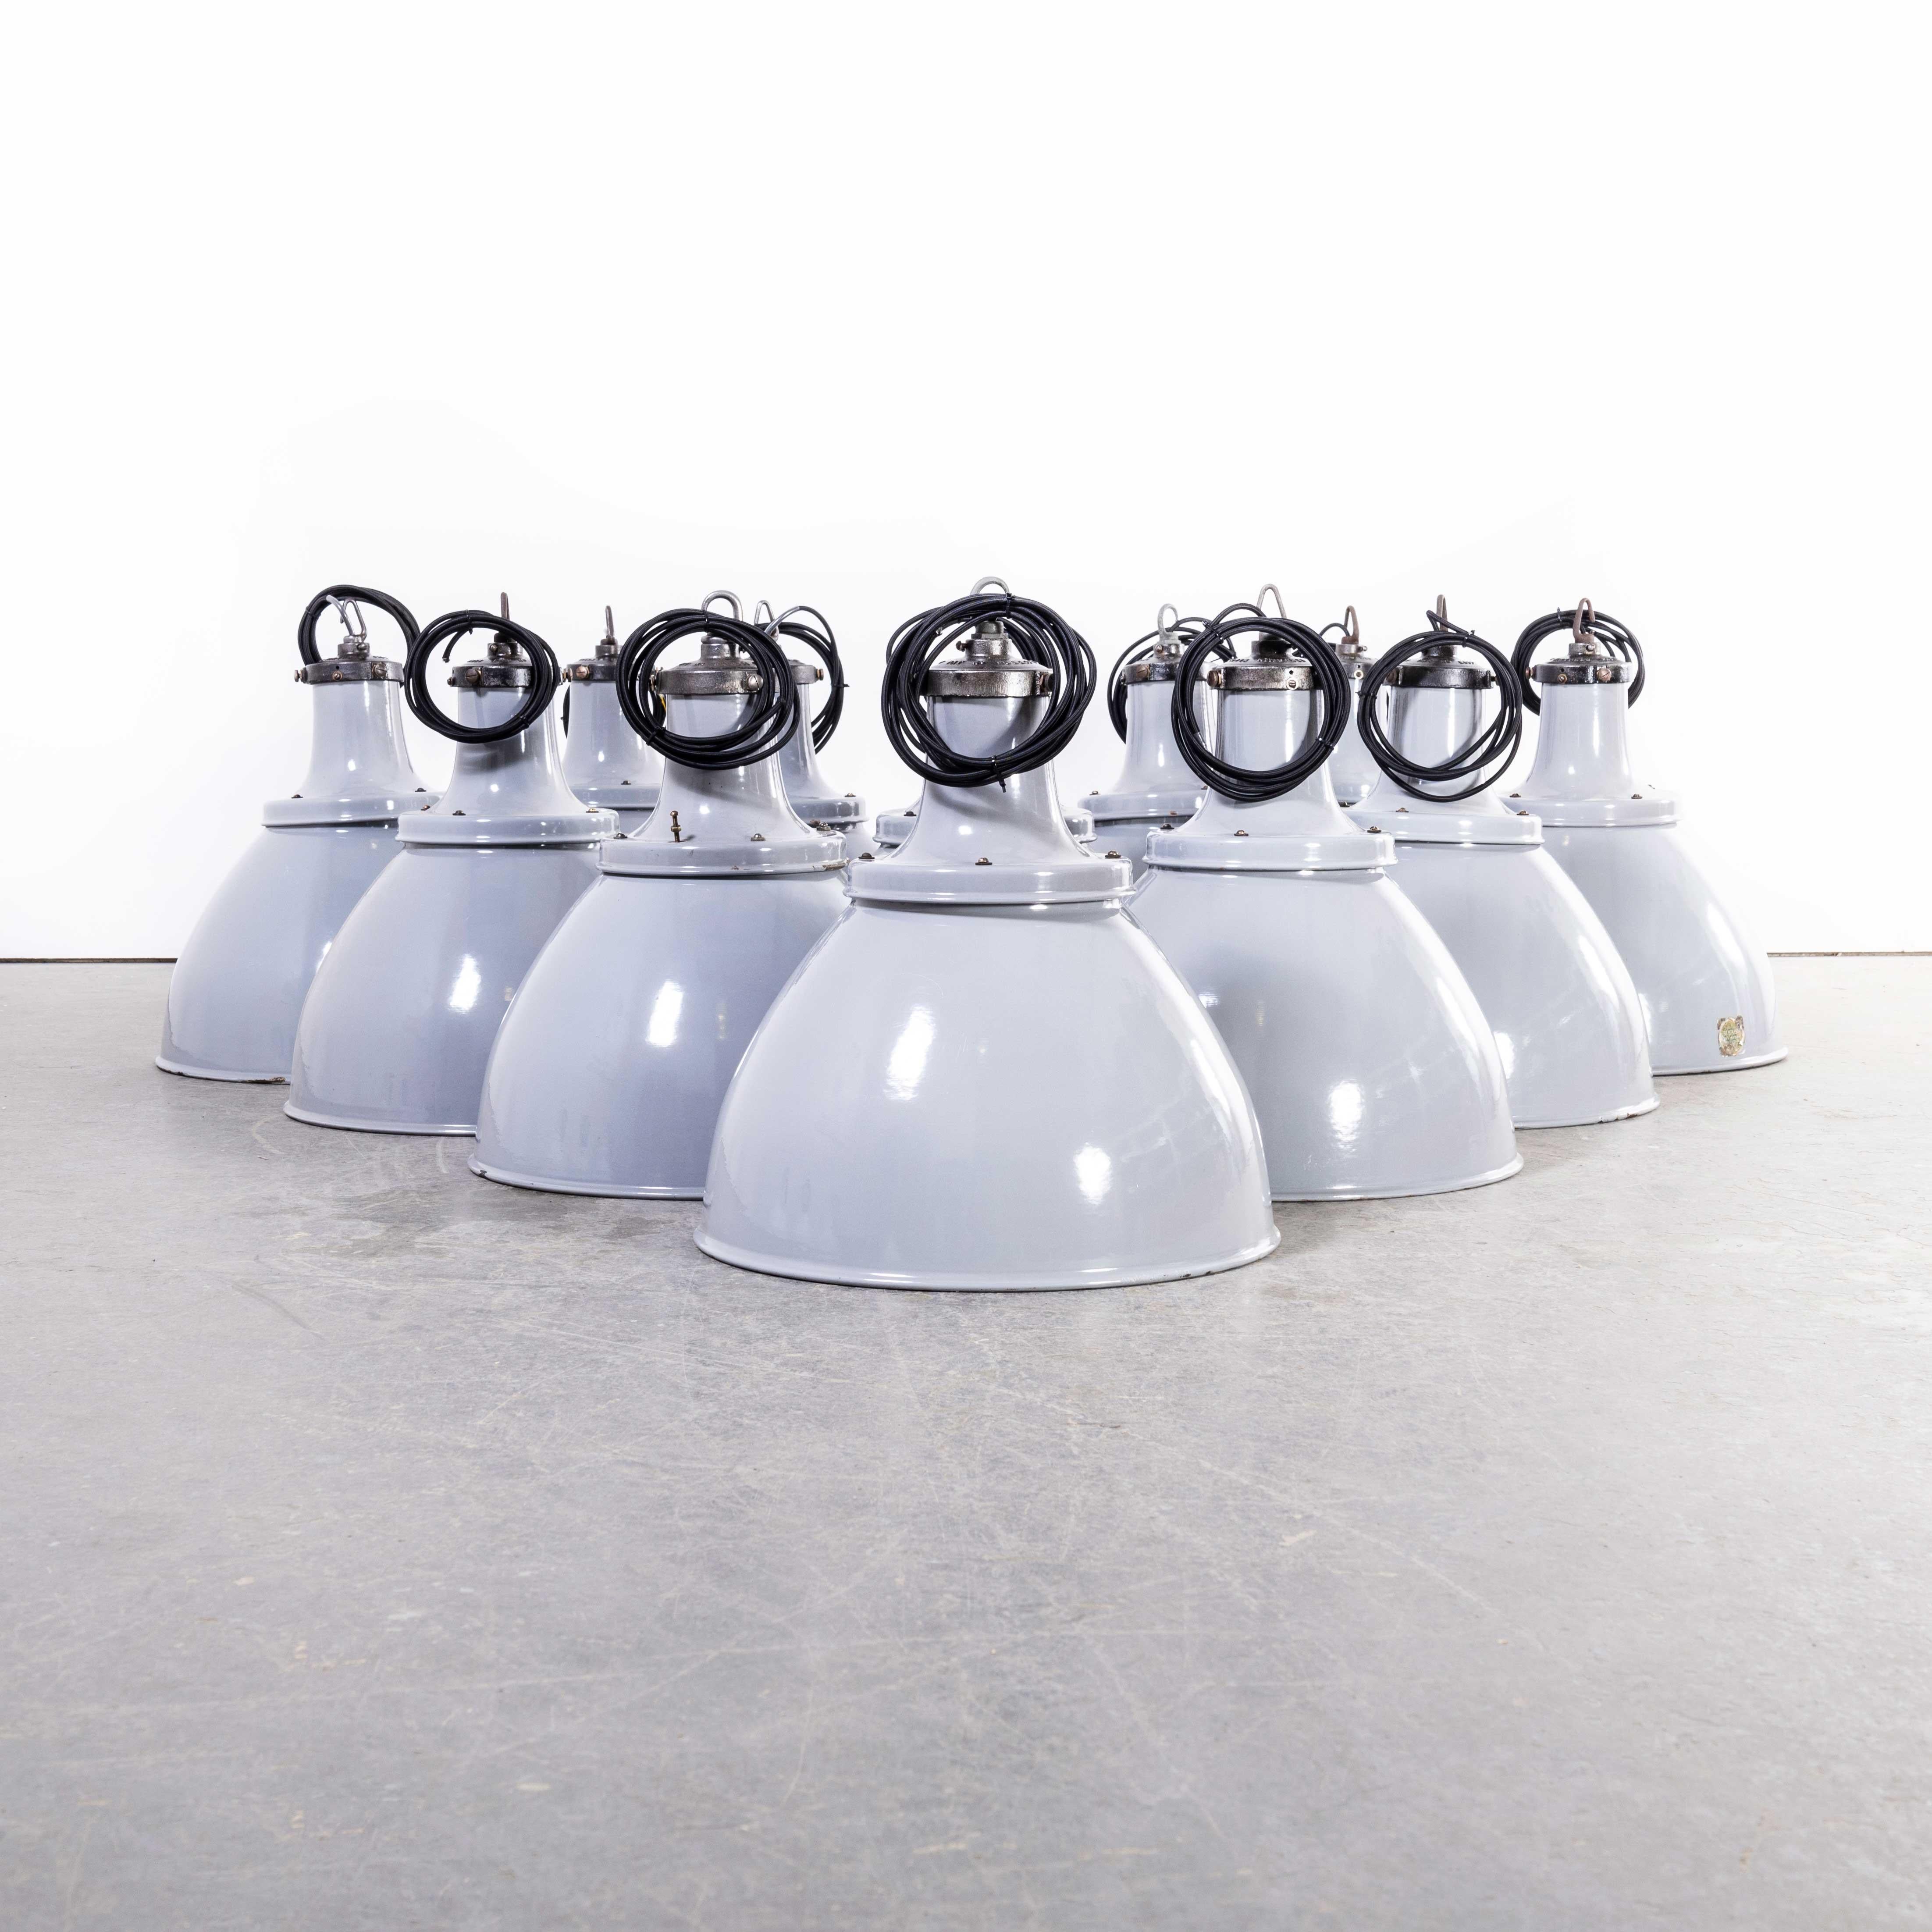 1960s Domed Benjamin Enamelled Pendant Lamps – 18 inch – Restored
1960s Domed Benjamin Enamelled Pendant Lamps – 18 inch – Restored. Benjamin was arguably the market leader in Industrial lighting in the 1930s through to 1960s. Their main market was